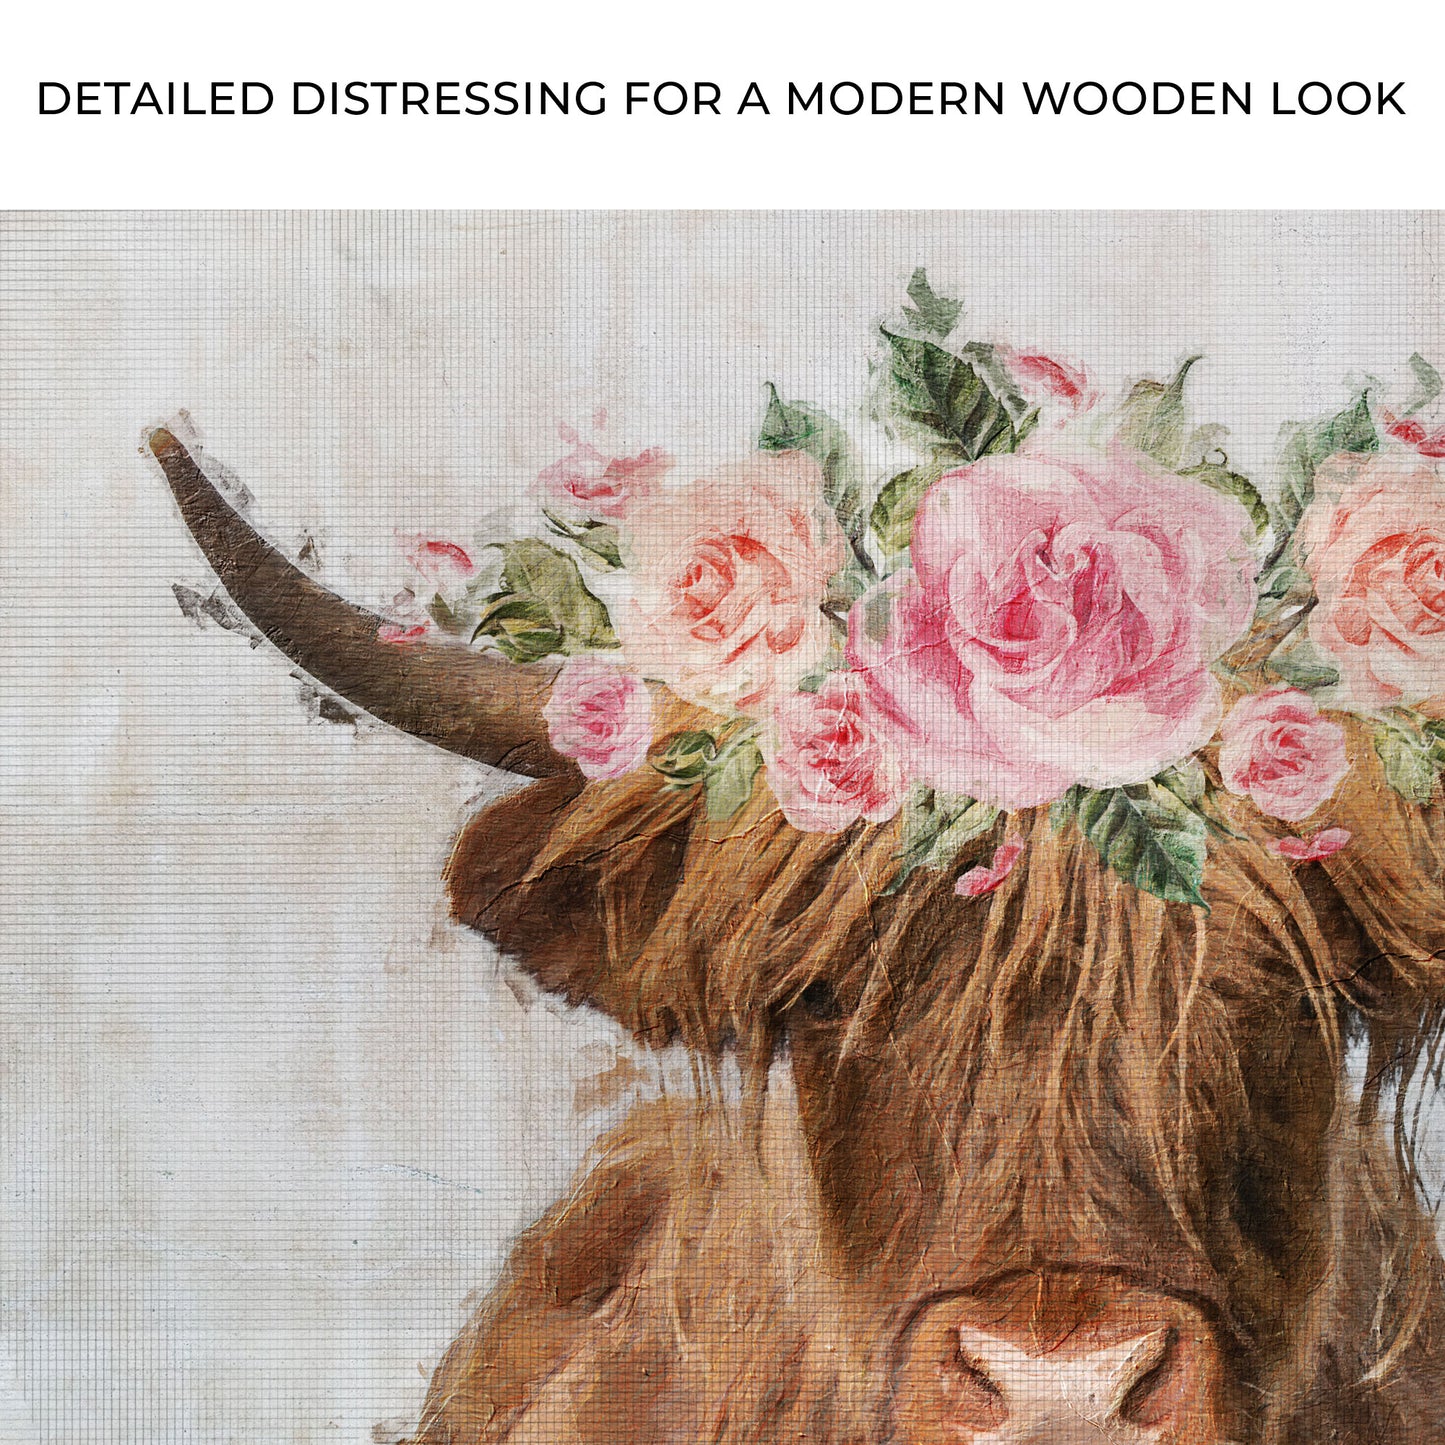 Highland Cow Floral Wreath Painting Canvas Wall Art Zoom - Image by Tailored Canvases